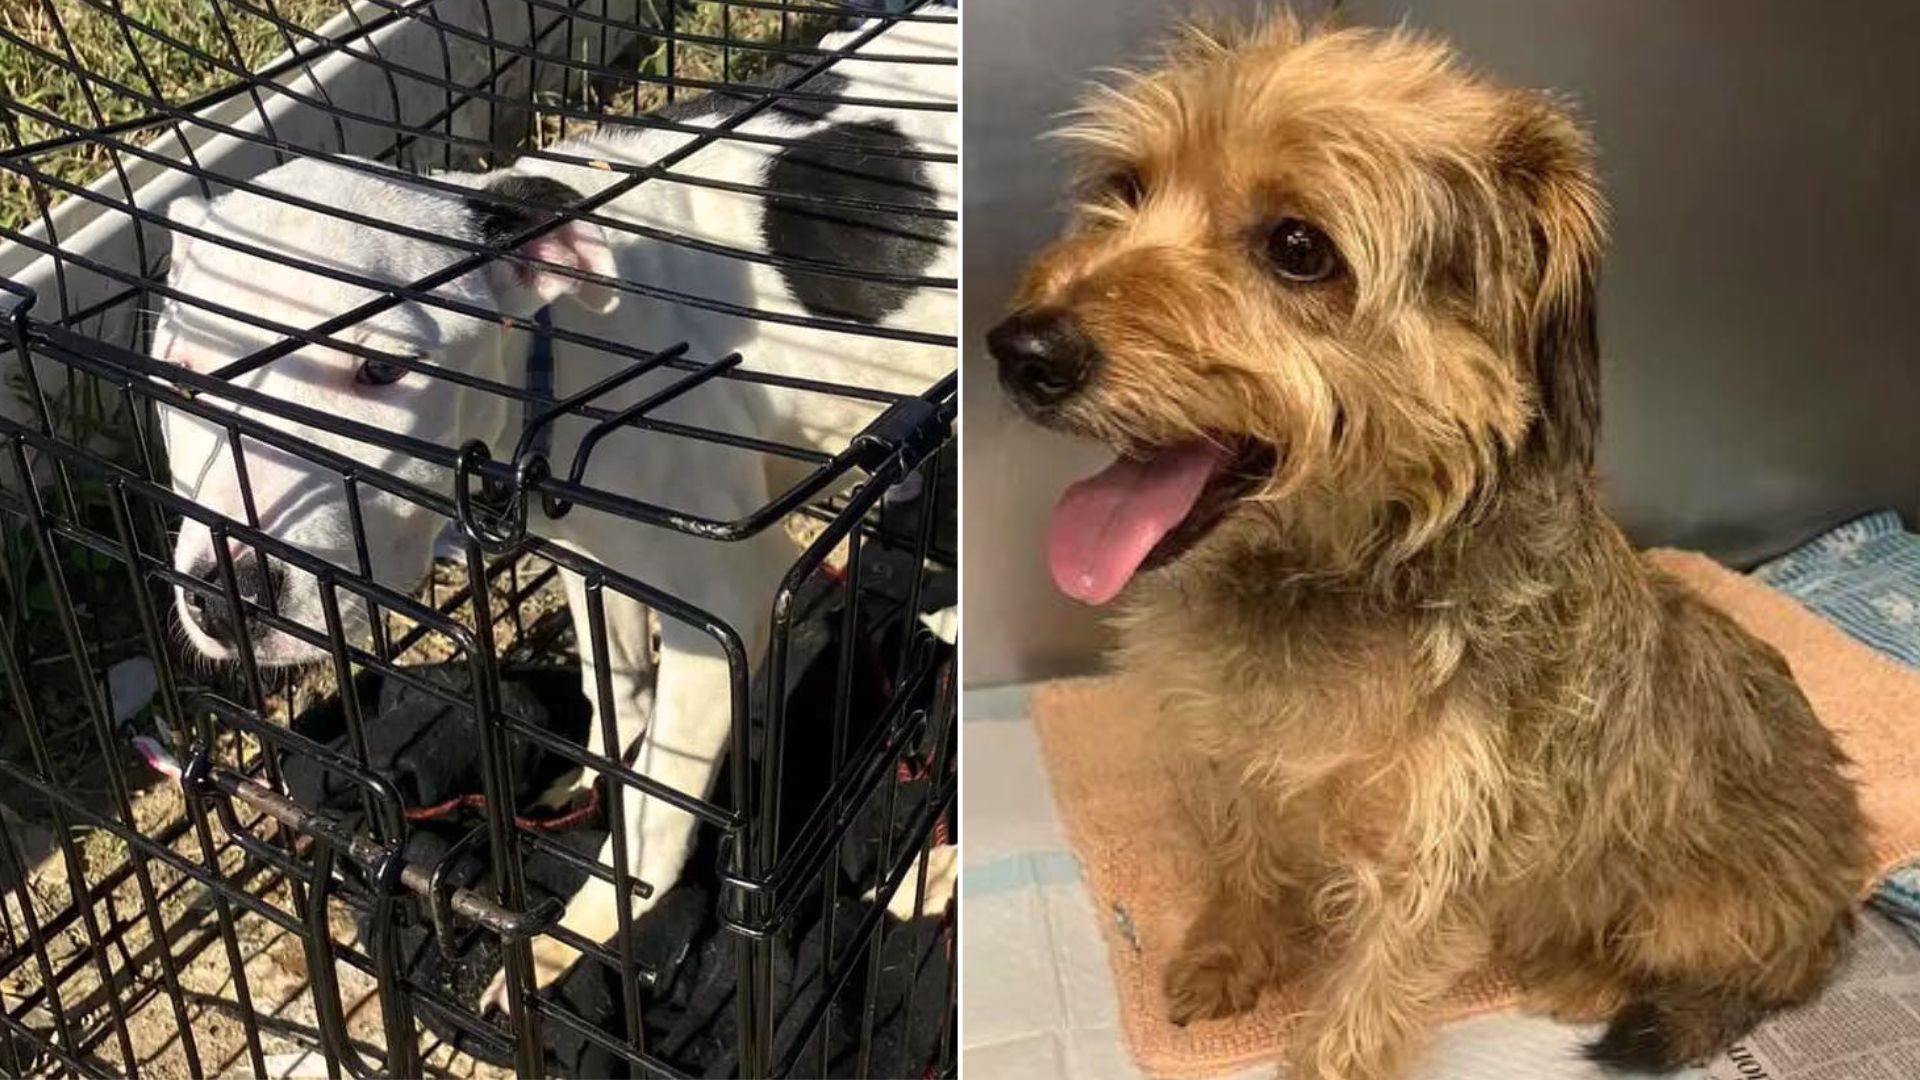 A Dramatic Appeal From The Shelter After Finding Abandoned Dogs At The Same Location One After Another